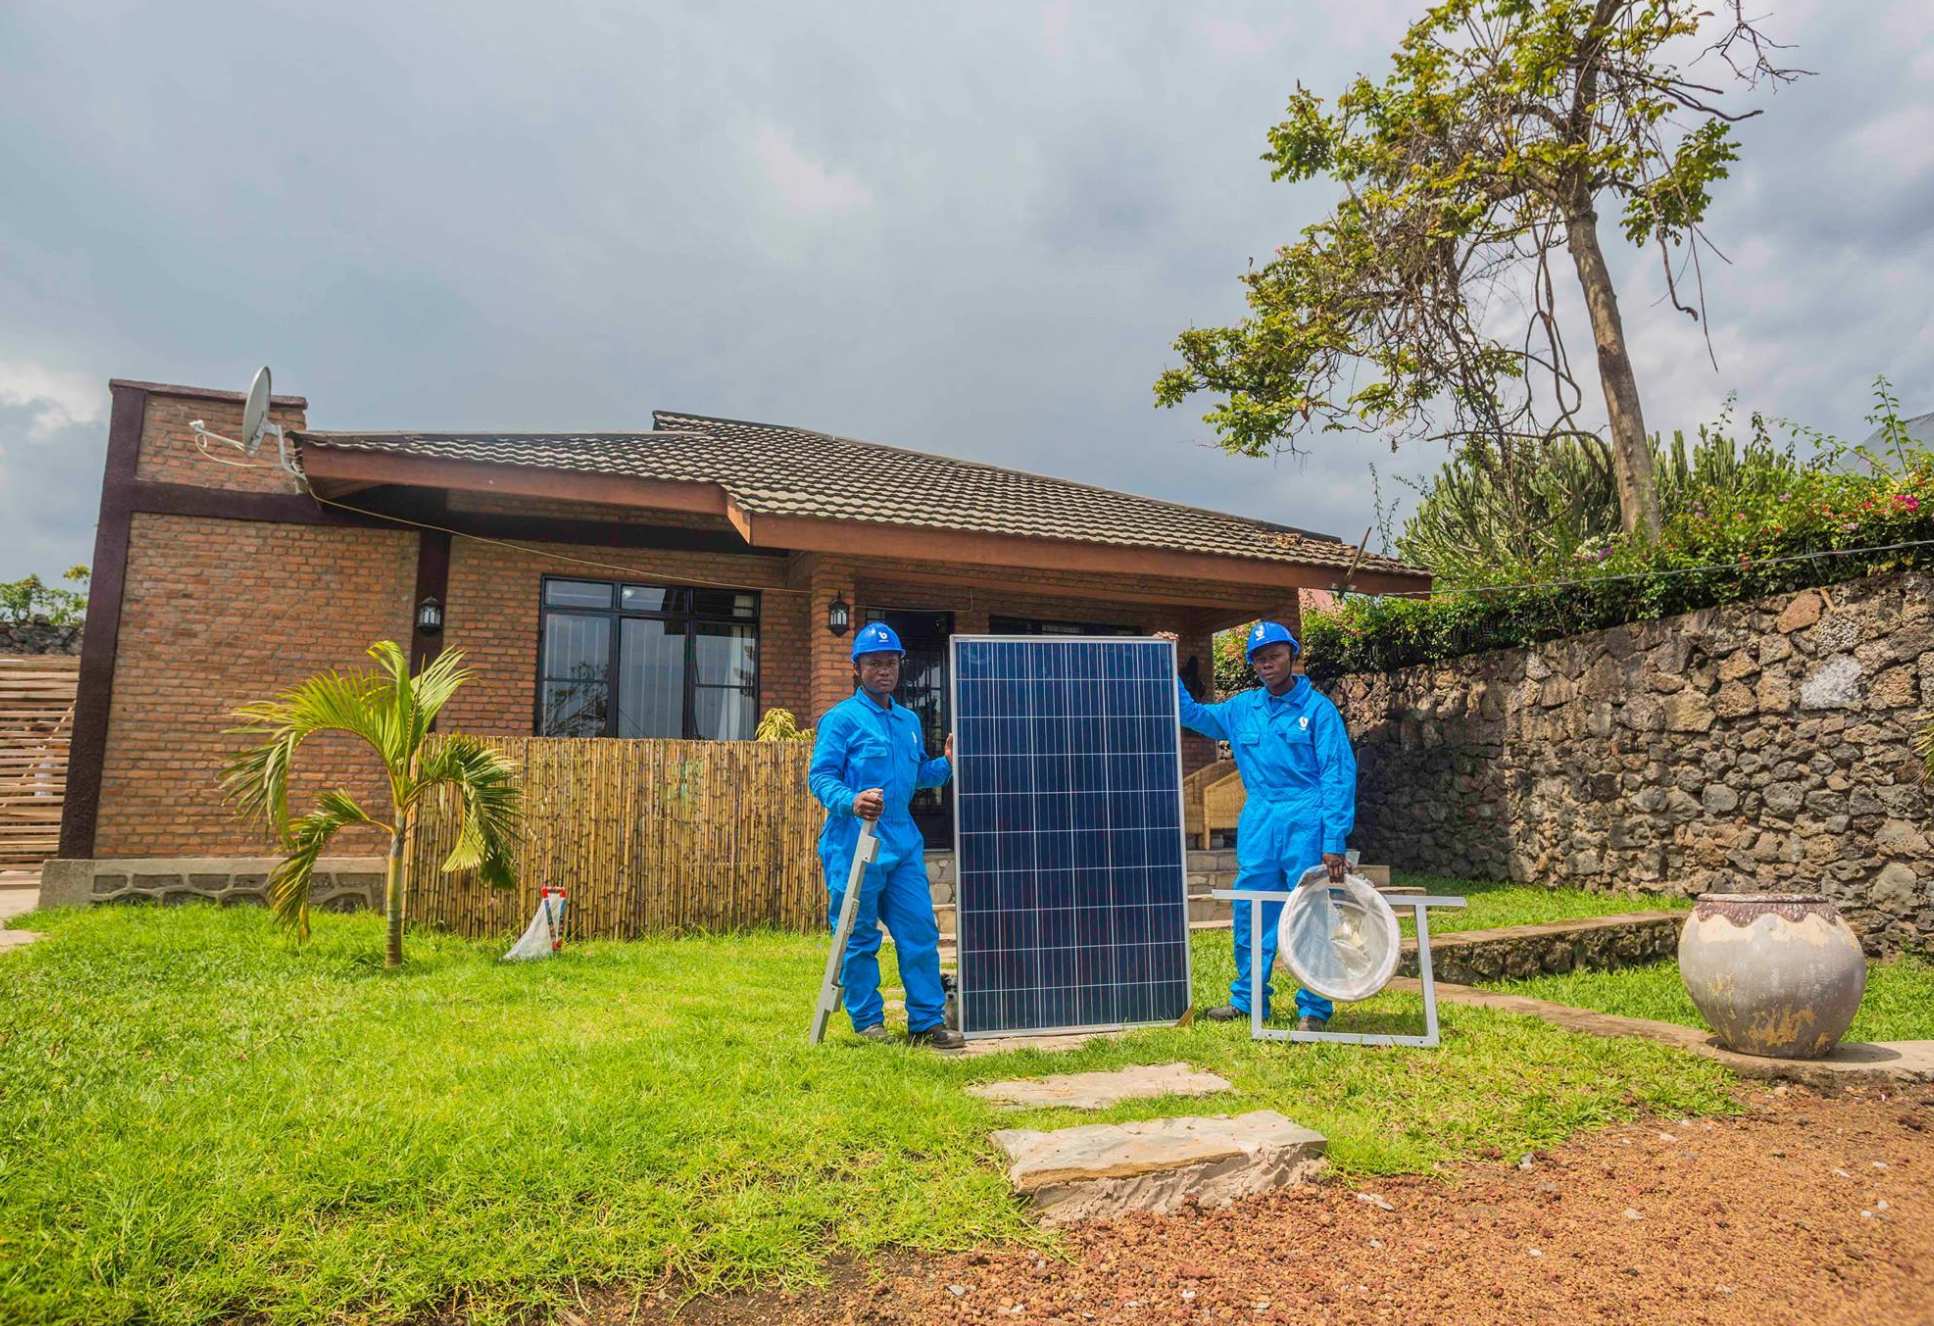 Workers with a solar panel